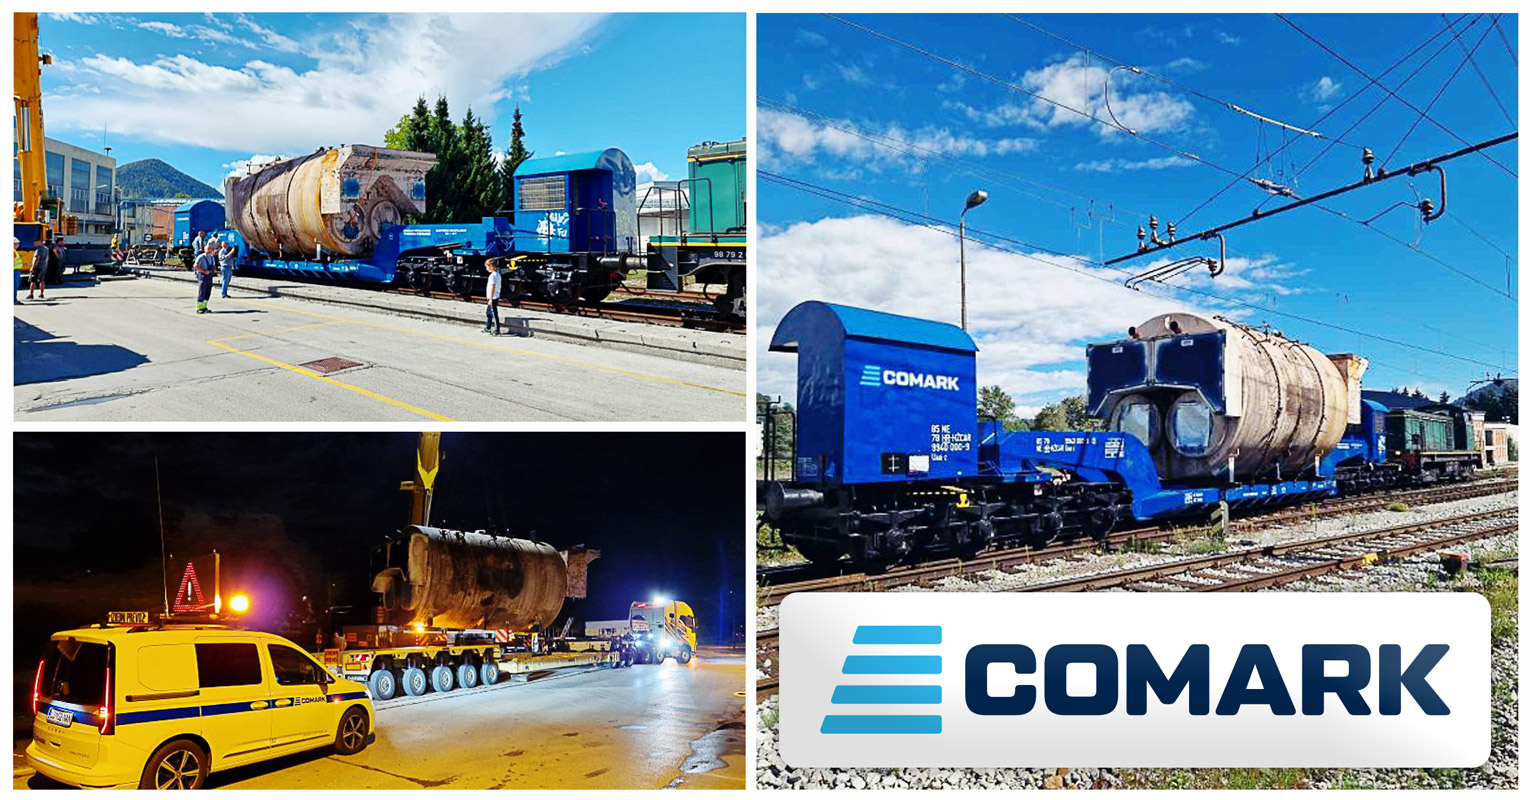 Comark - Project Logistics Found a Solution to Transport a Heavy Load Across a Rail Bridge Using their Schnabel Wagon